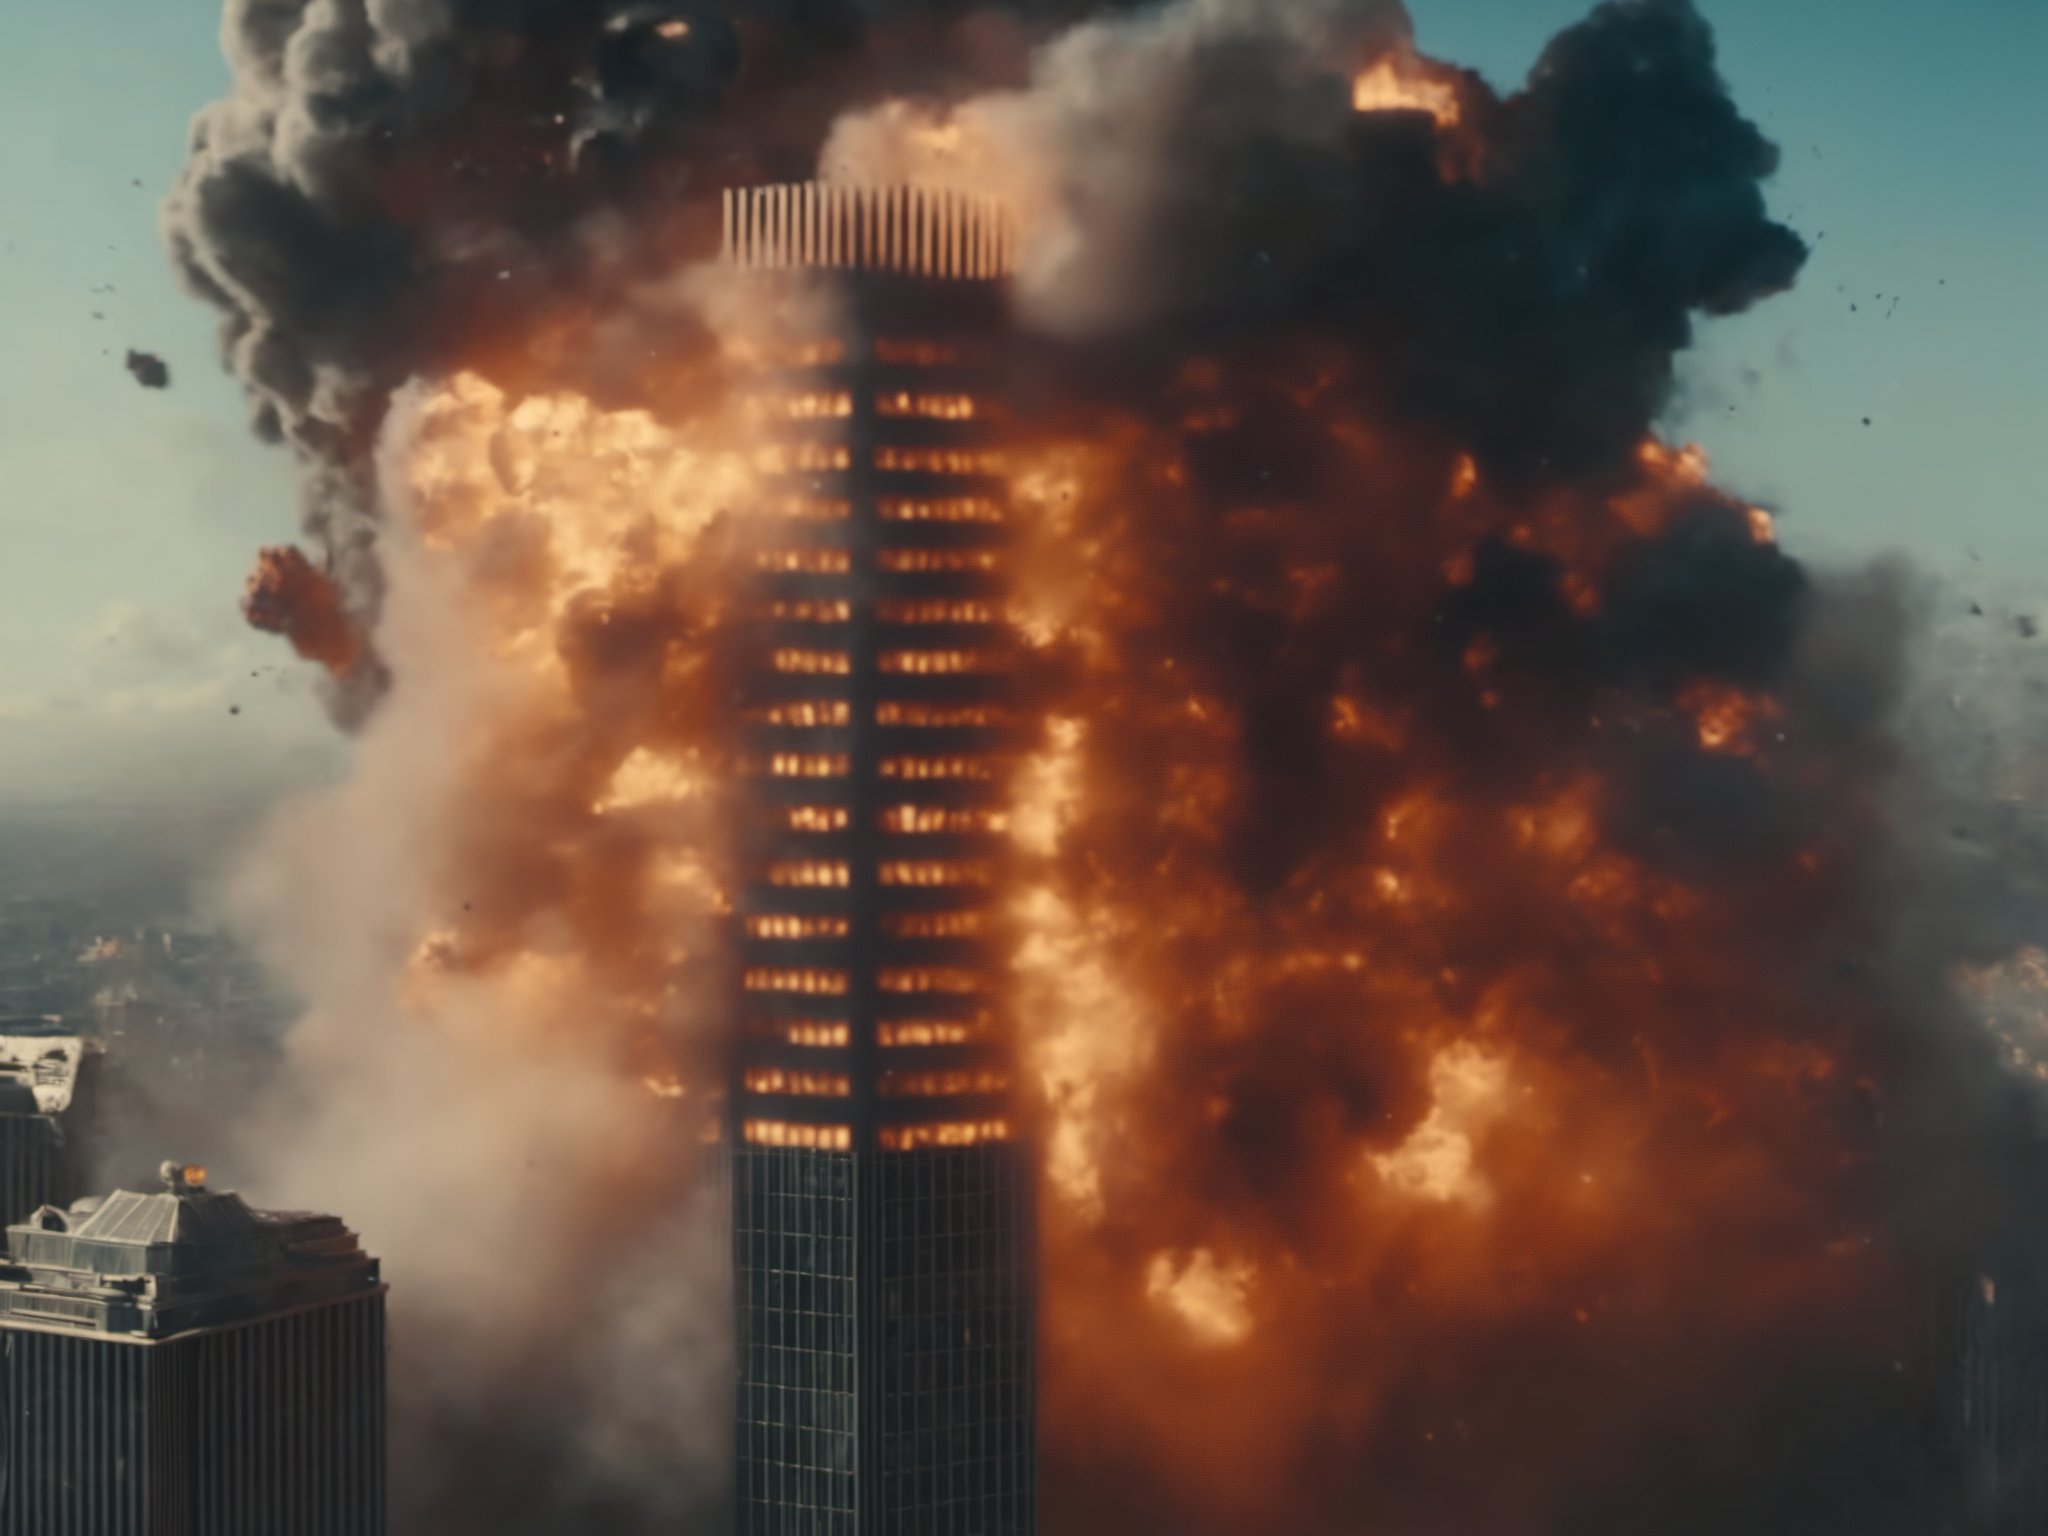 (m0vieexpl0sion), cinematic still of a skyscraper, (small explosion in the middle of the building:0.7), far view, city, sky, cloud, best picture, best quality, UHD, oscar winner, directed by Christopher Nolan, shot on Canon camera, cinematic lighting